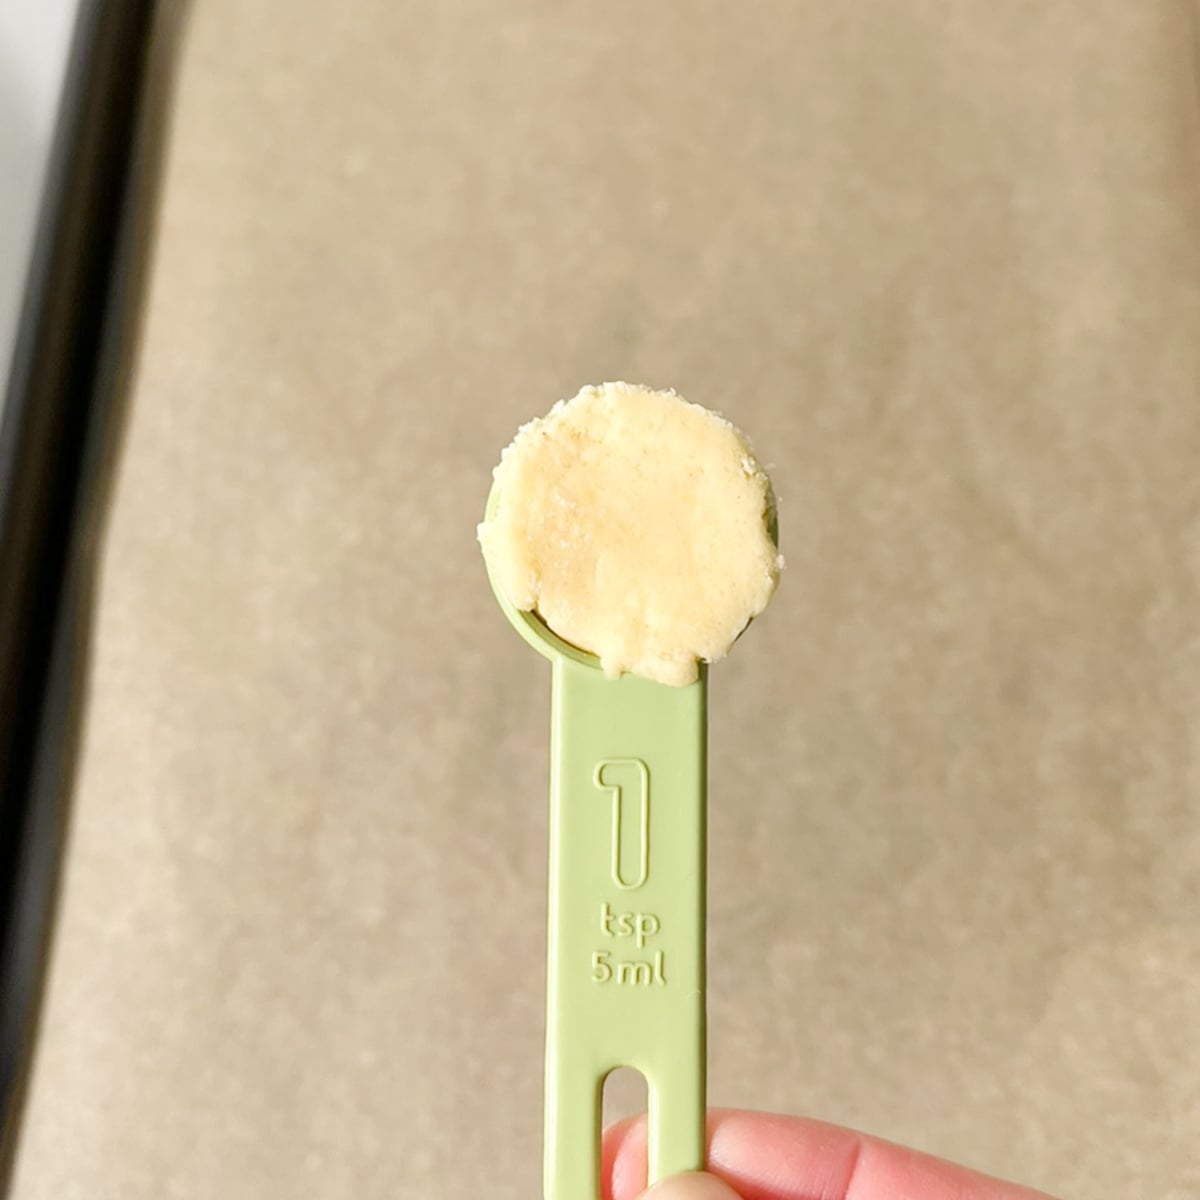 One teaspoon measuring spoon filled with Casadinho dough.